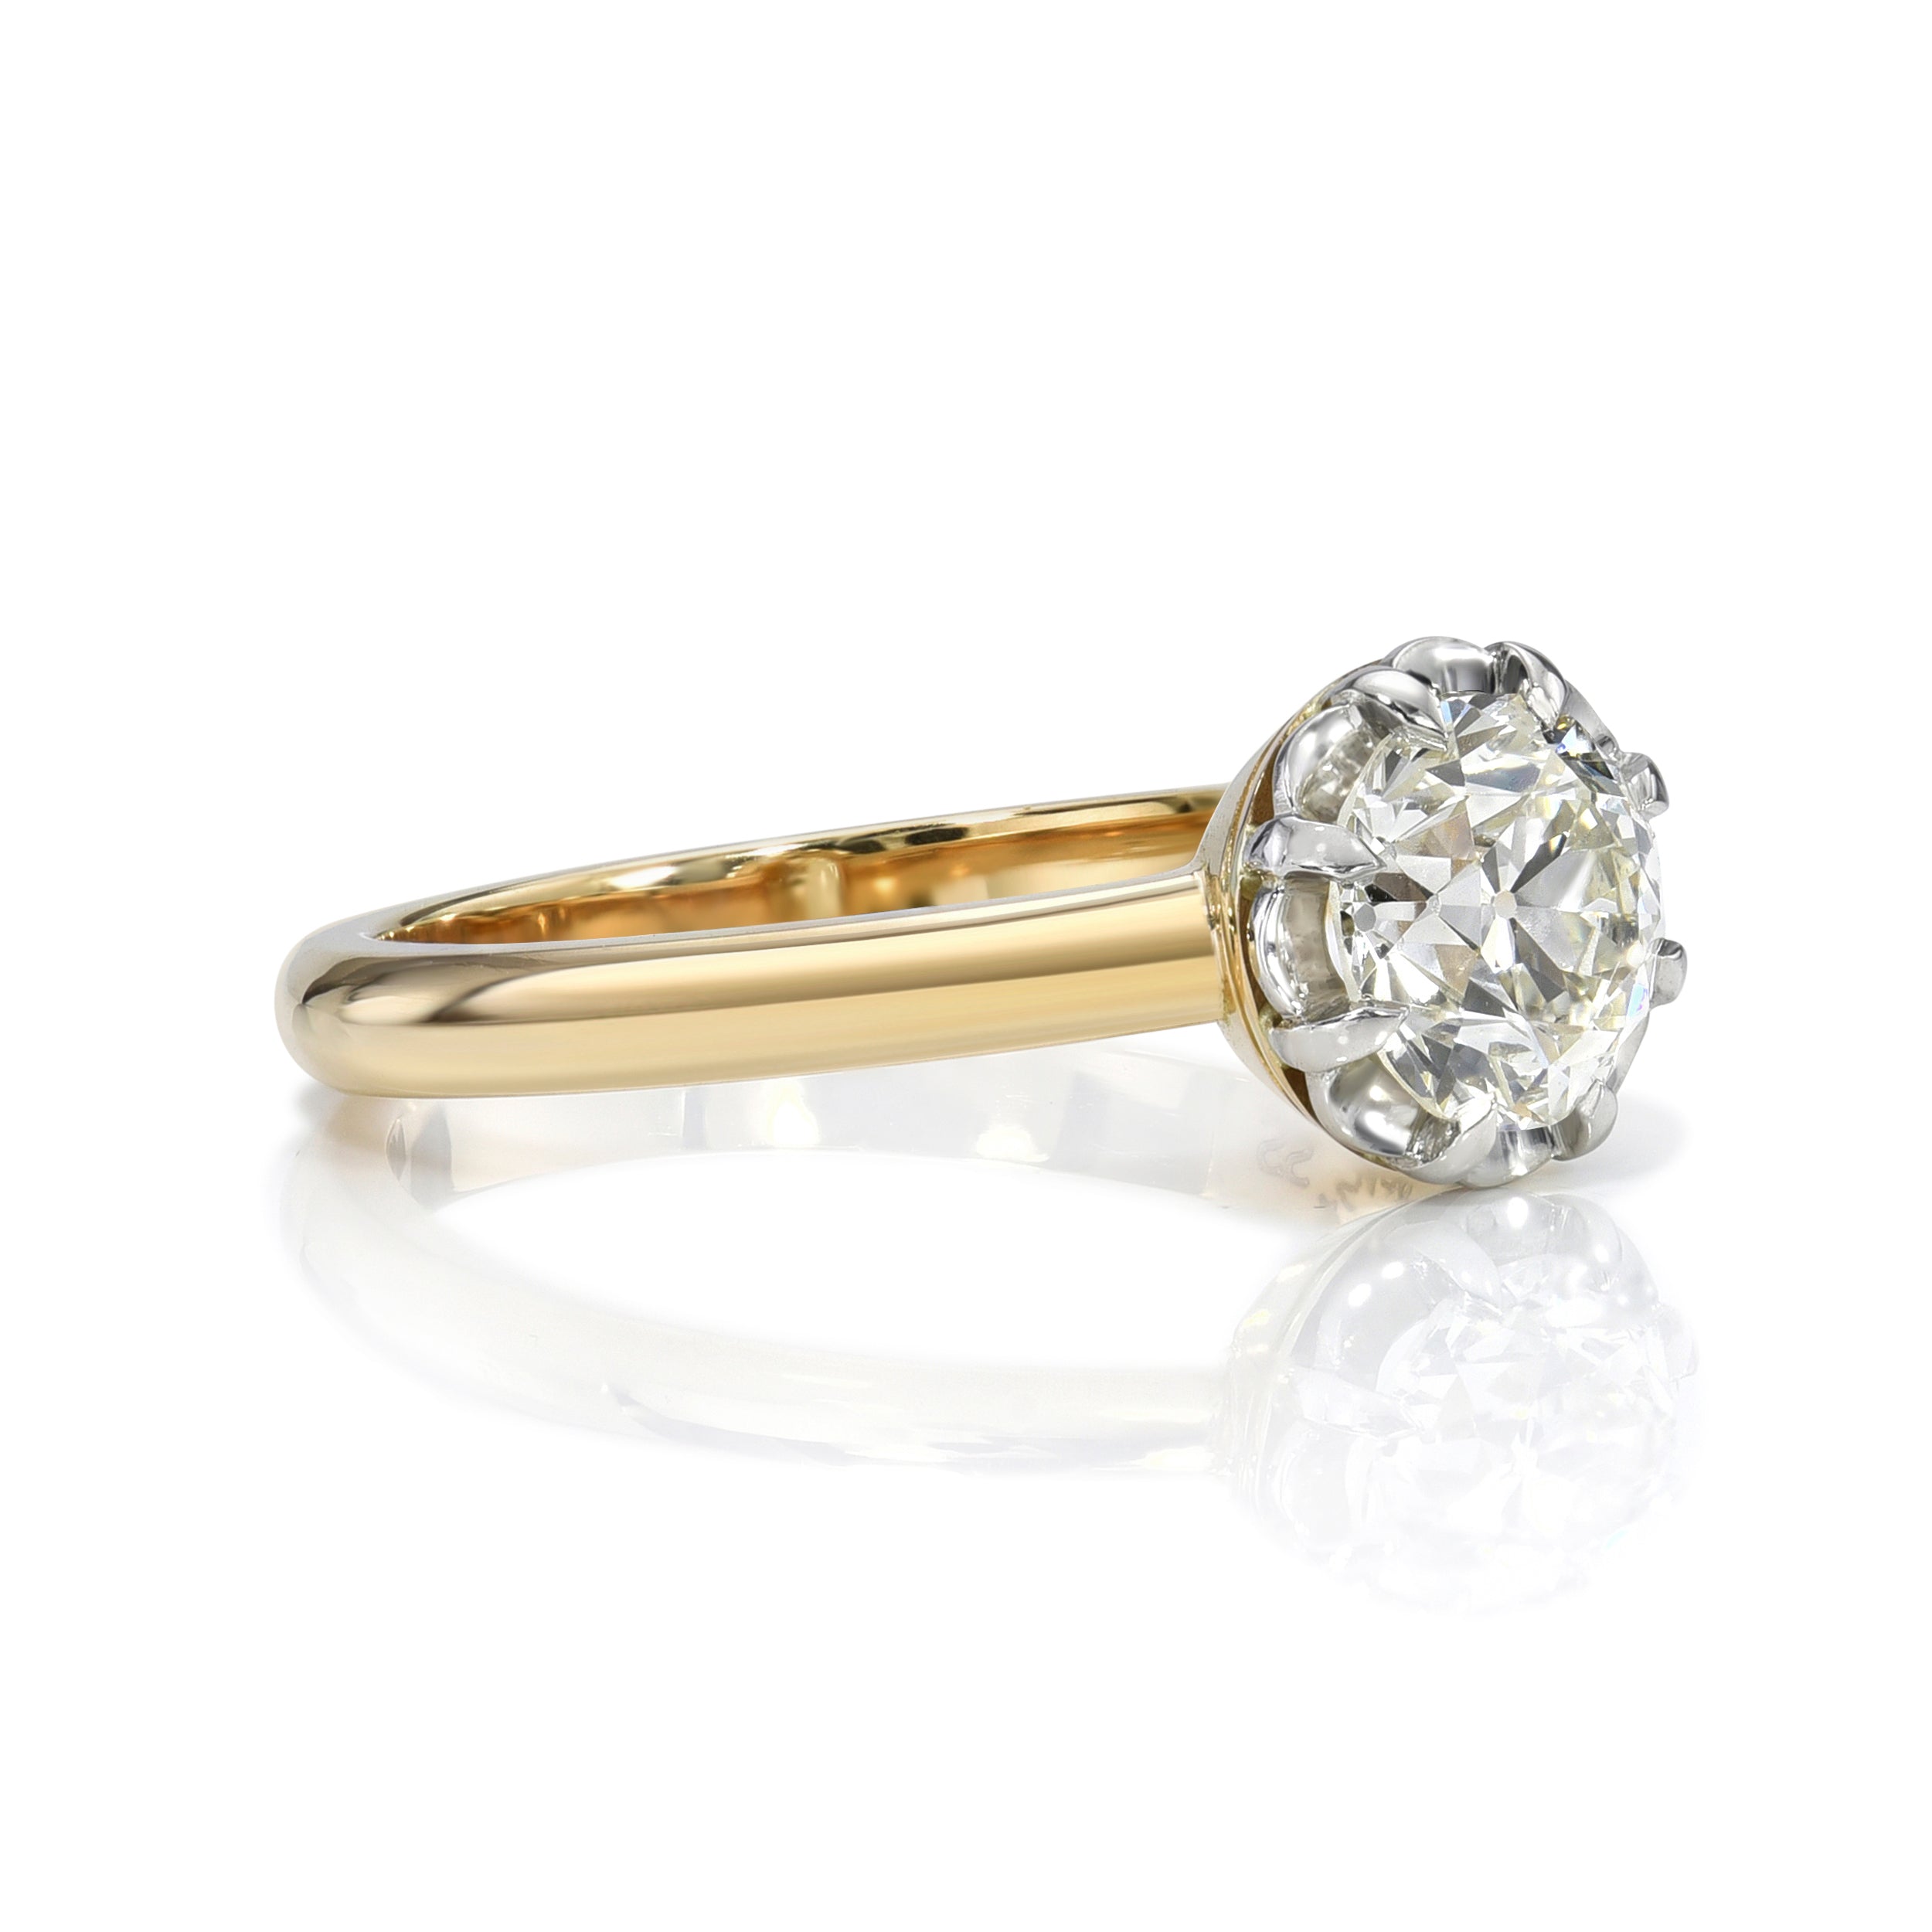 SINGLE STONE JOSILYN RING featuring 1.00ct L/SI2 GIA certified old European cut diamond set in a handcrafted platinum and 18K yellow gold mounting.